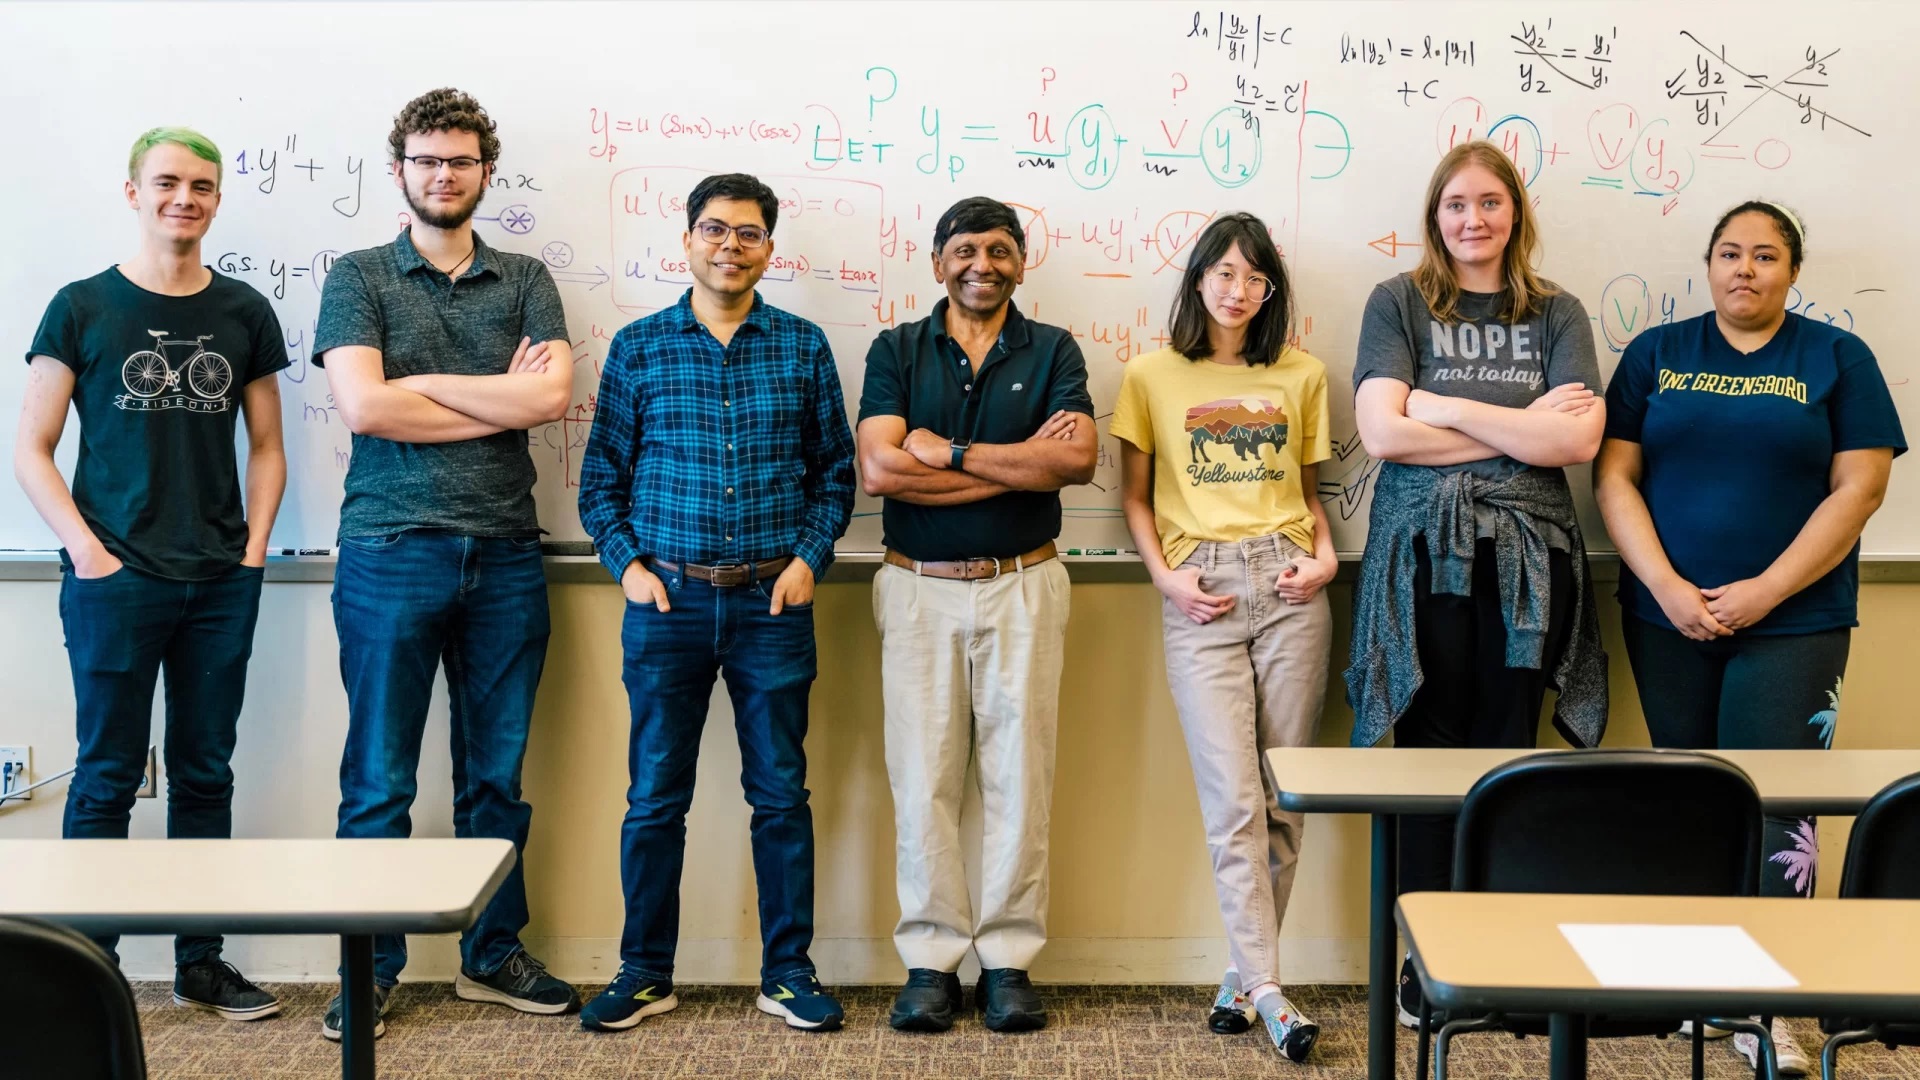 Mathematics and Statistics professor Ratnasingham Shivaji poses in the middle of a group of students in front of a whiteboard with equations on it.